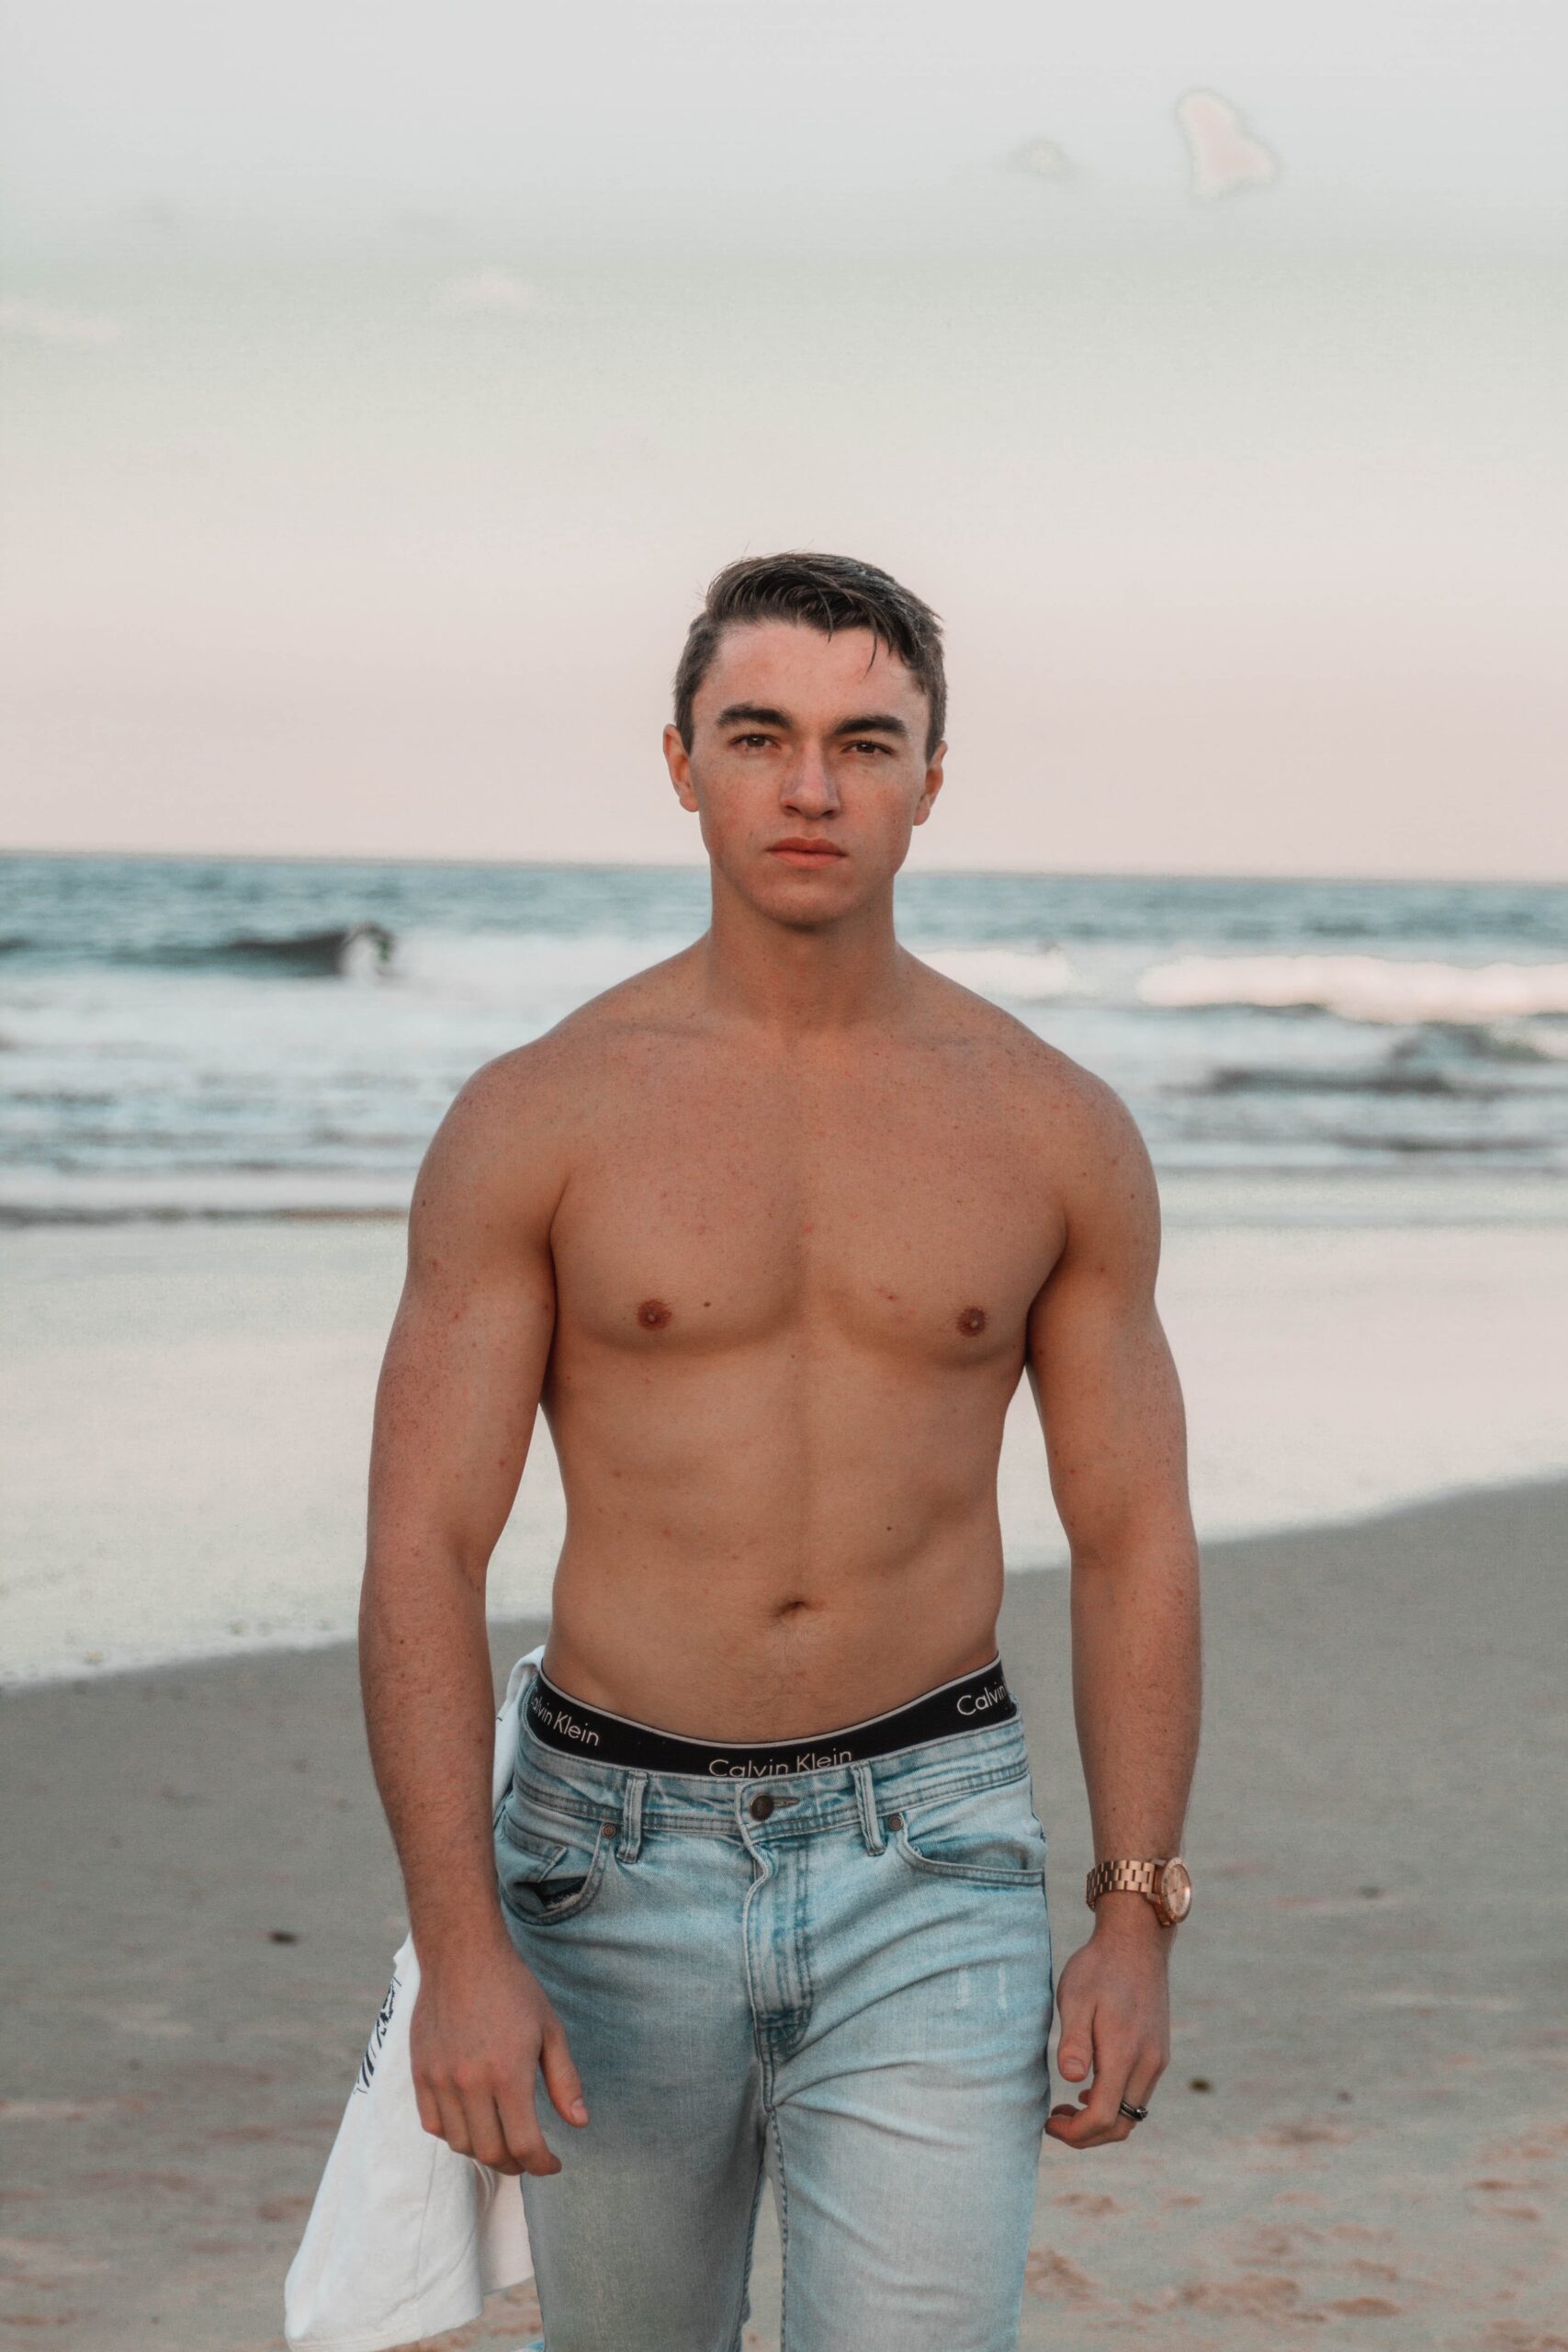 Gynecomastia Myths- 5 Misconceptions About Male Breast Reduction